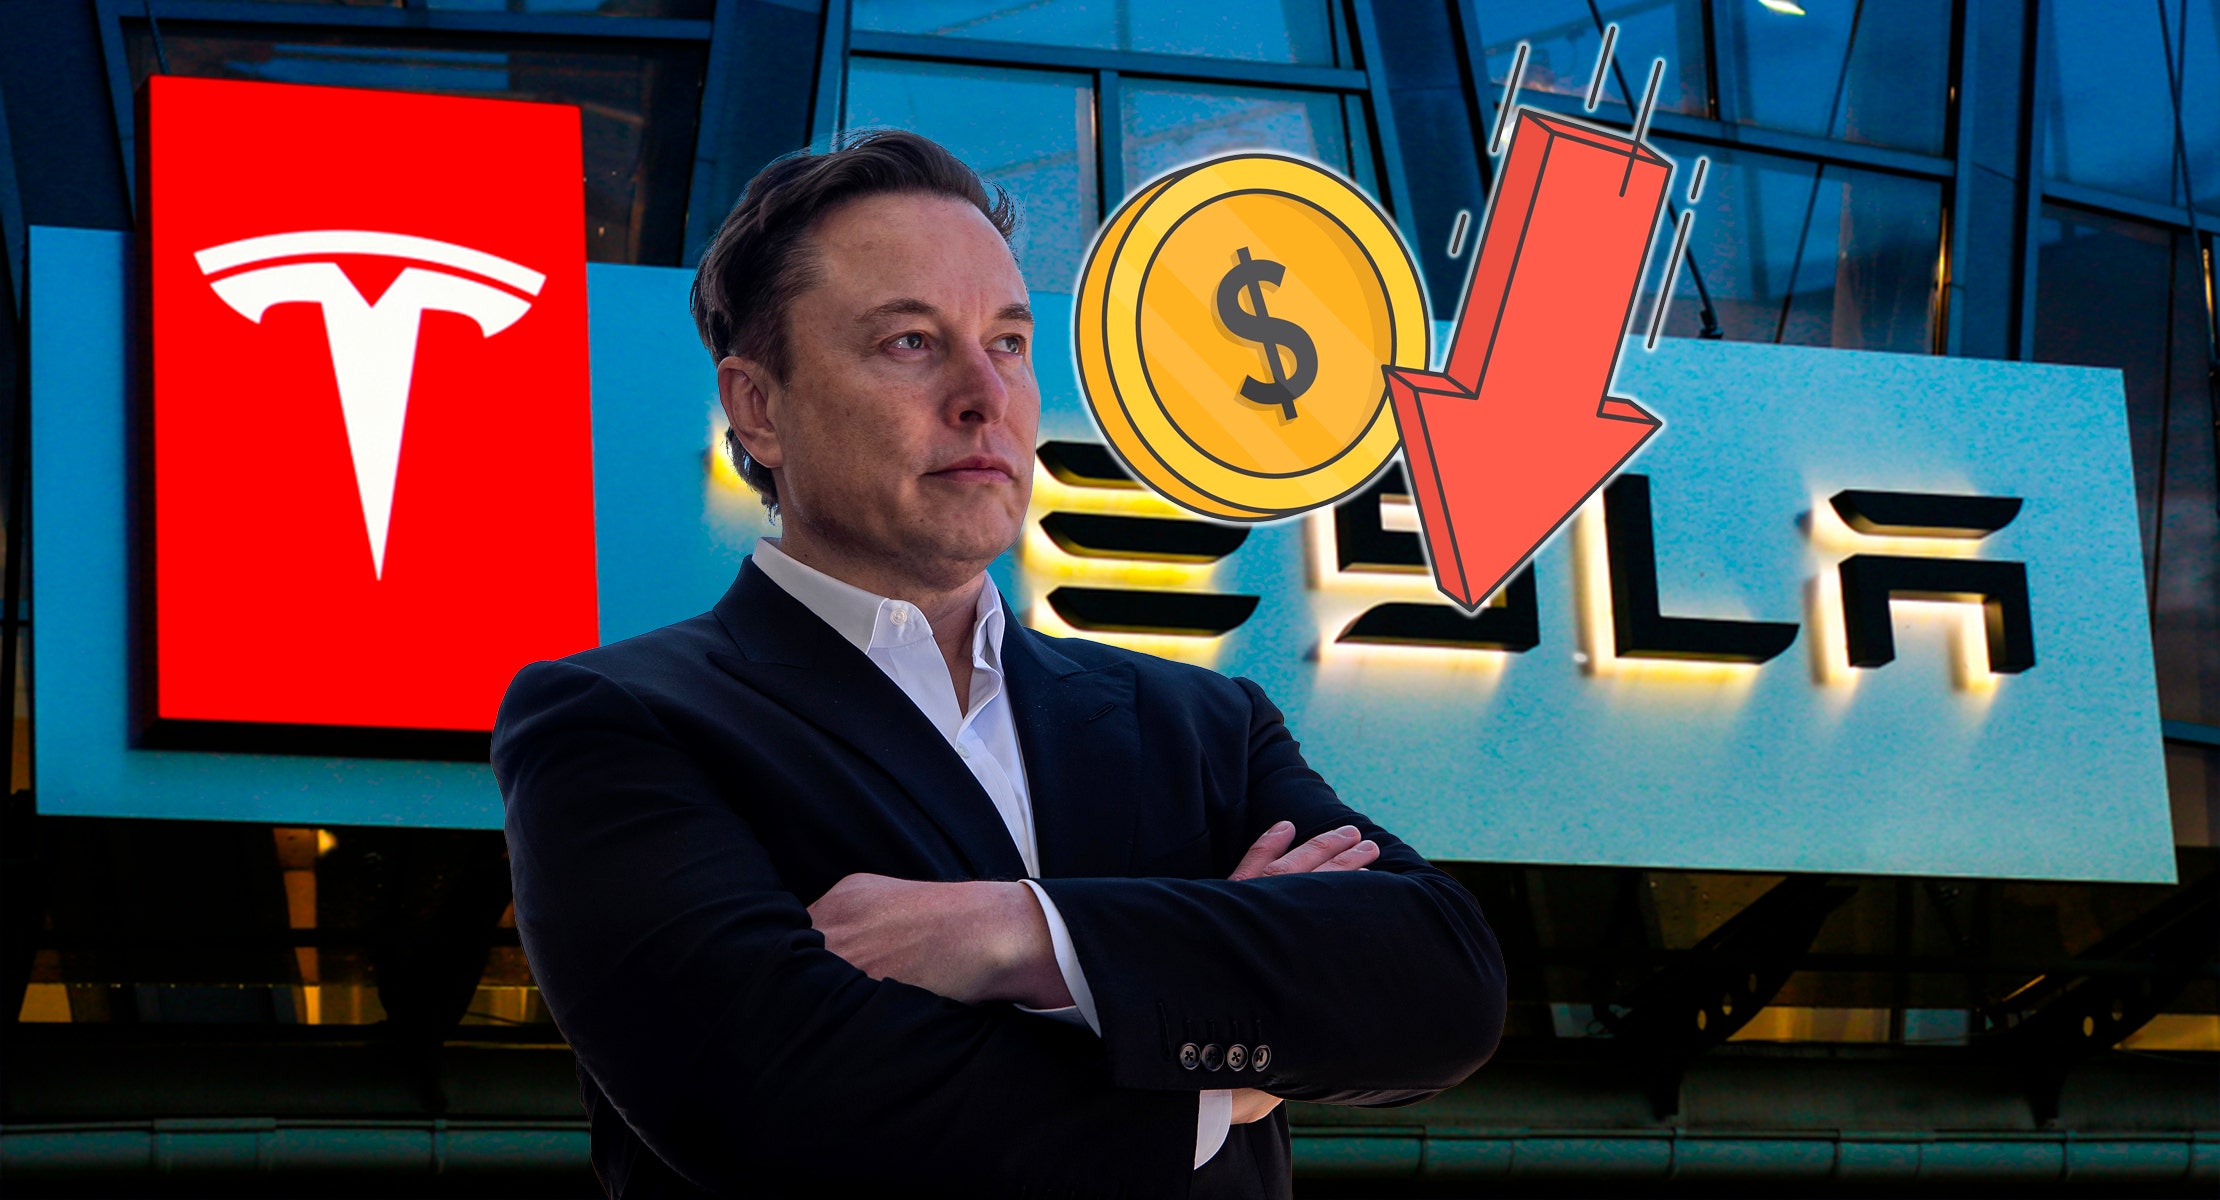 Elon Musk Expresses Dissatisfaction Over IRS Norms For EV Credits, Largest iPhone Plant In China Resumes 100% Production, US Republican Back TikTok Sale To US Entity: Top Stories Today